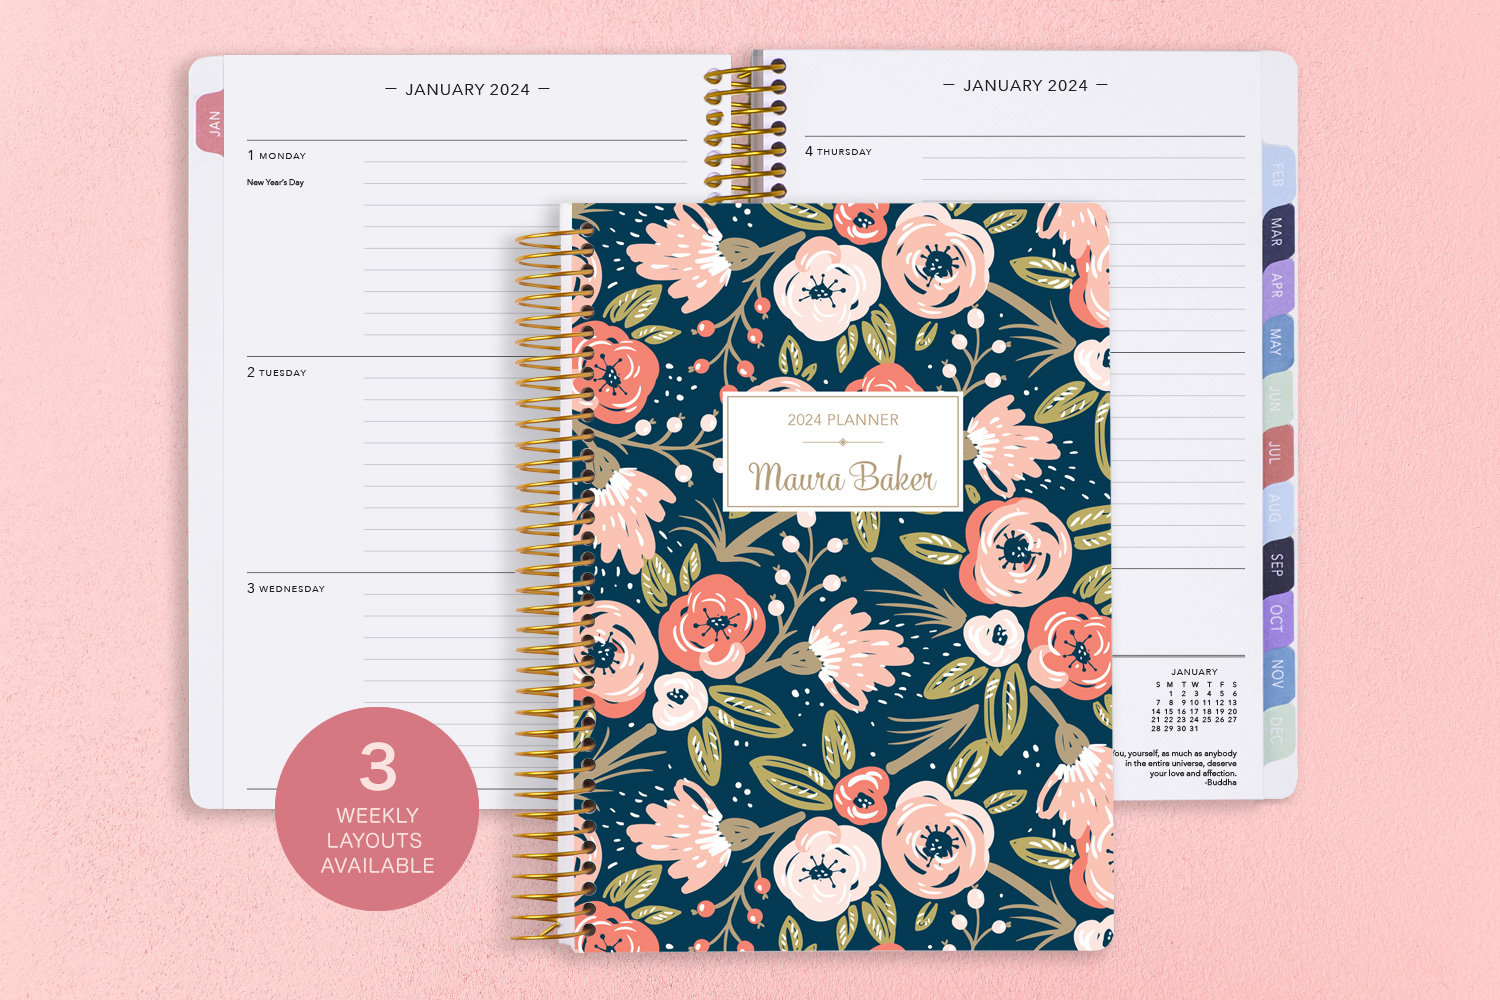 Birth Month Flowers Coloring Planner 2024 2 in 1 Beautiful Floral  Illustrations to Color and 12 Month Diary Calendar, Weekly Organizer 